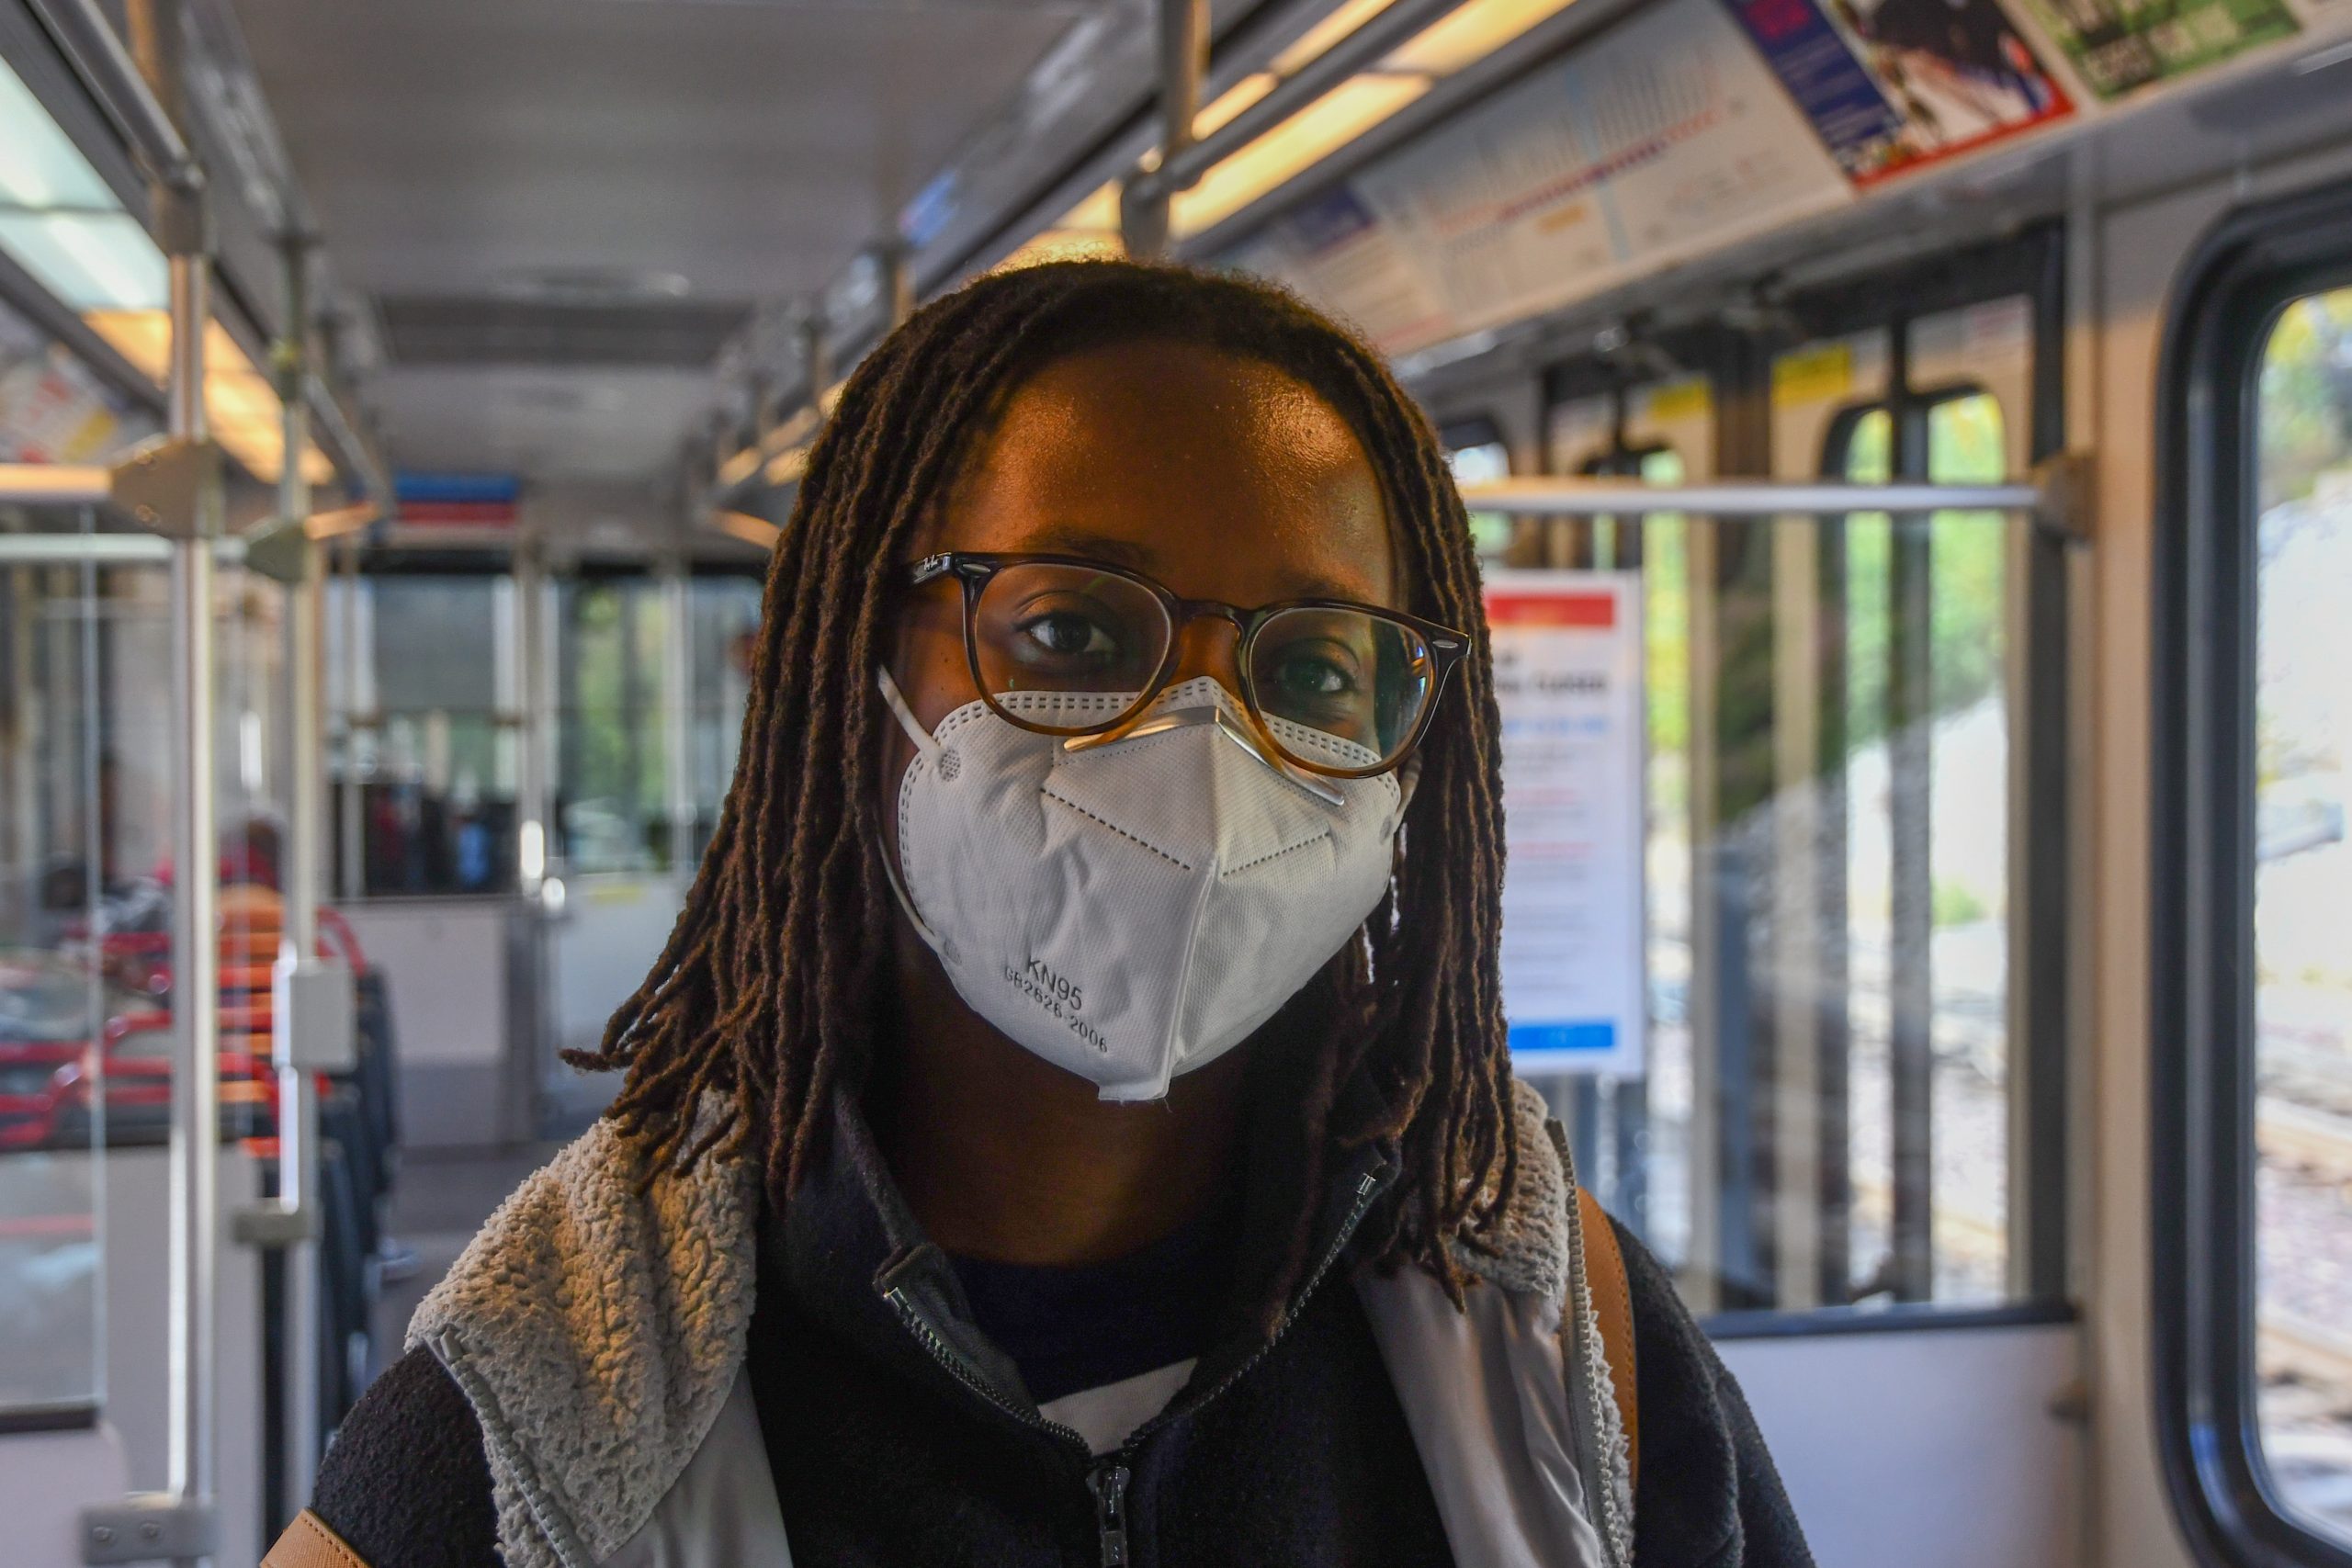 A person with big round glasses, long dark hair and a light blue face mask wears a gray vest as the MetroLink is visible in the background.